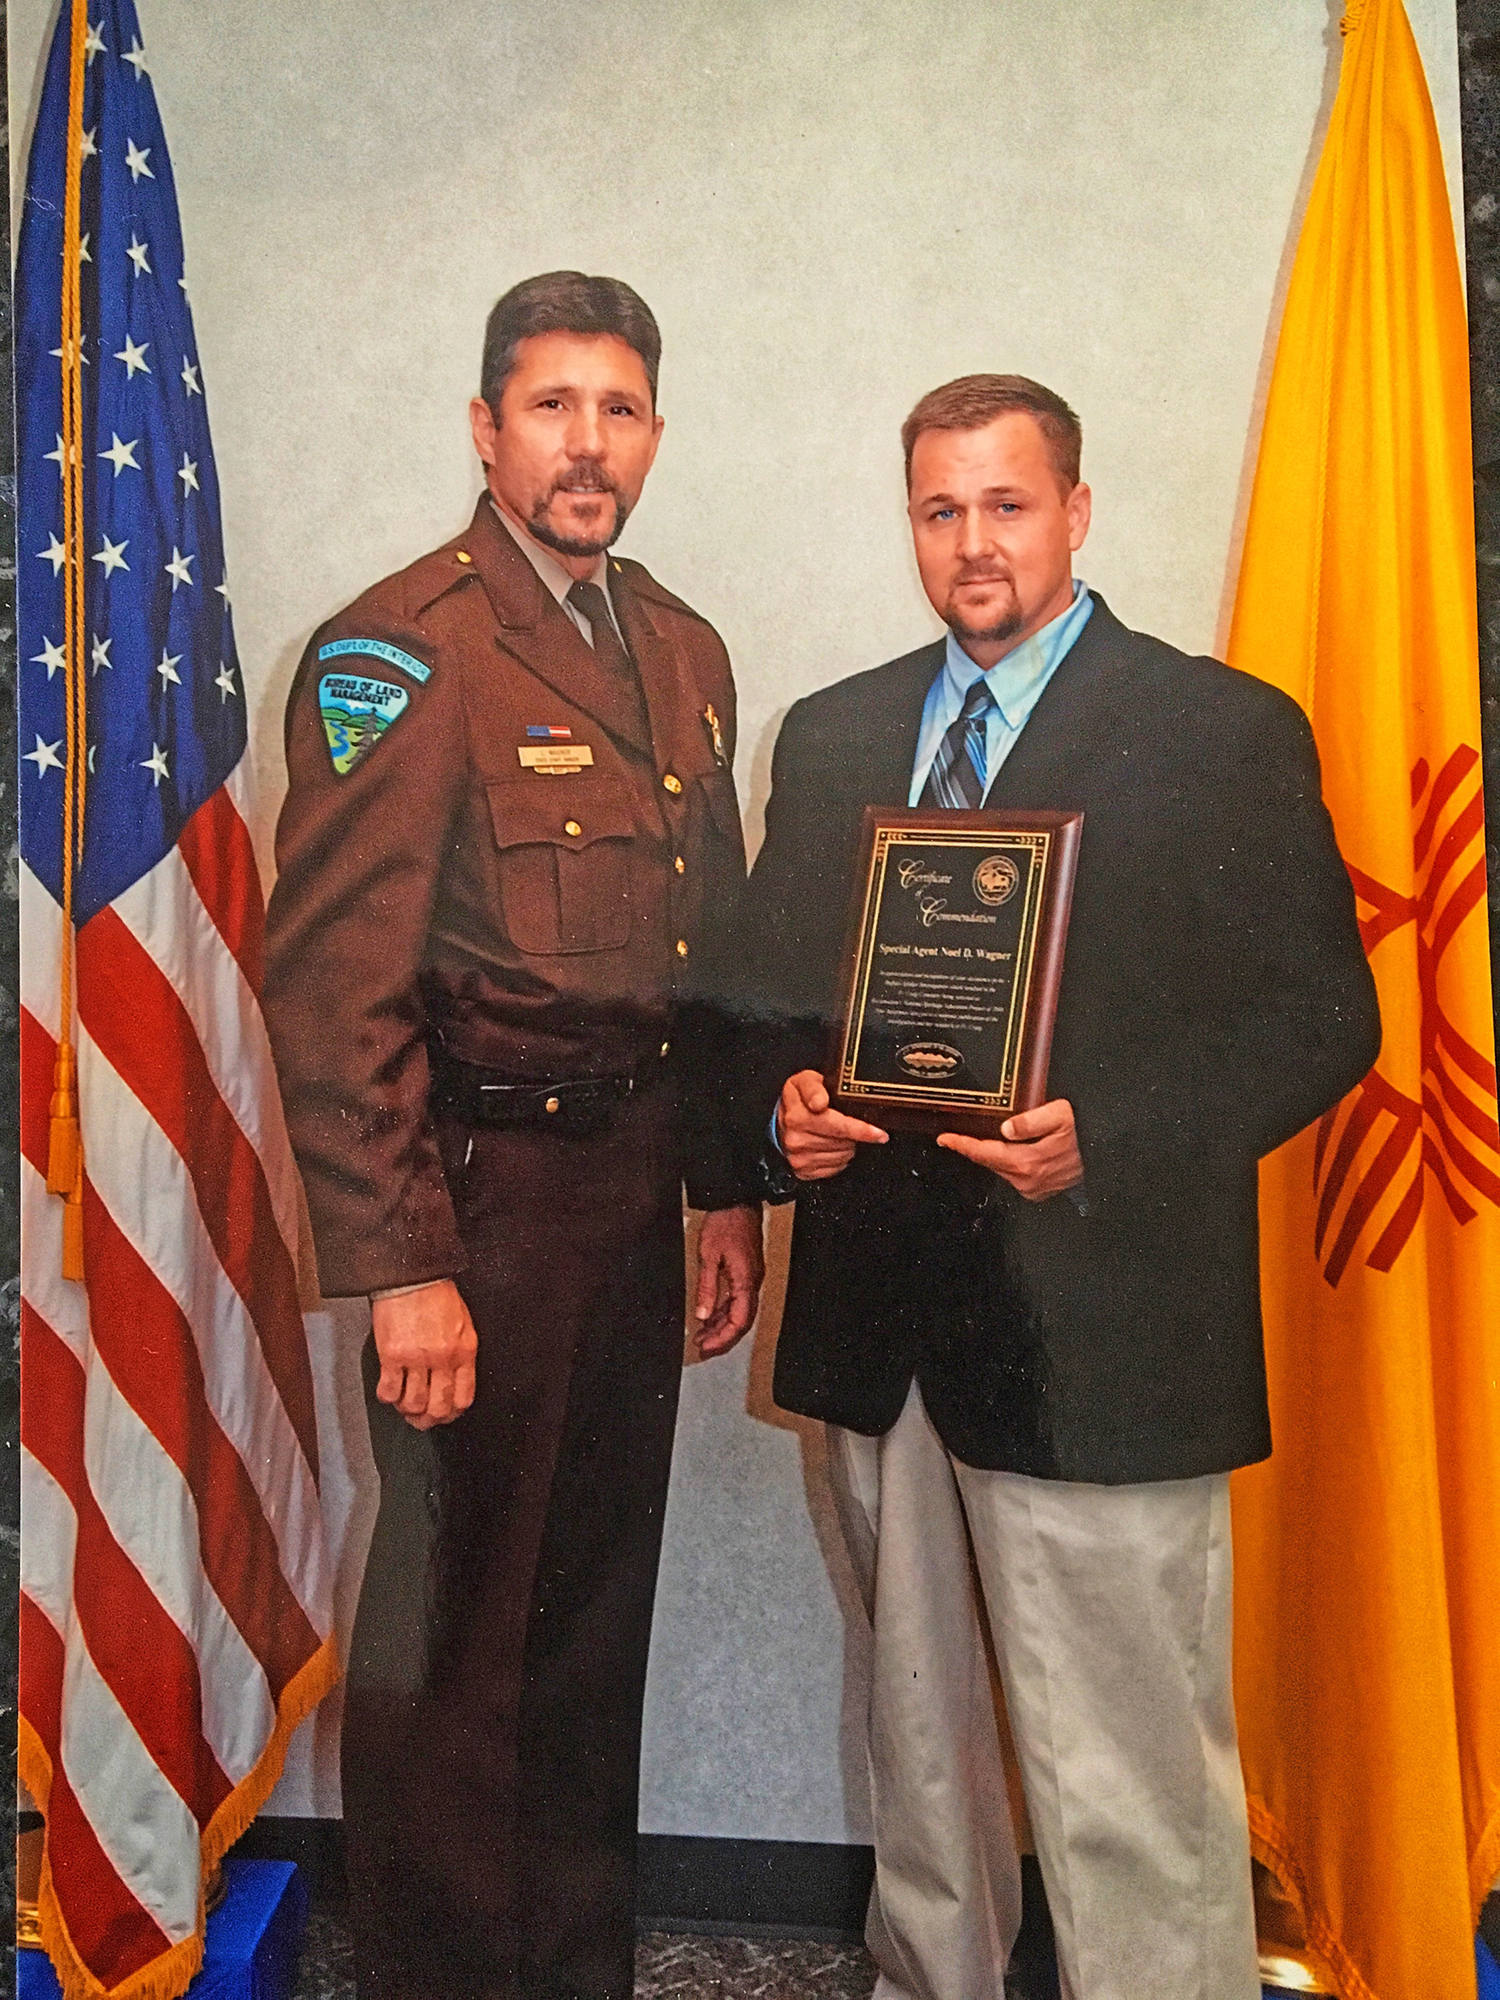 Special Agent Noel Wagner (right) and Bureau of Land Management Ranger Lanny Wagner (Brother on left) at FBI recognition ceremony.